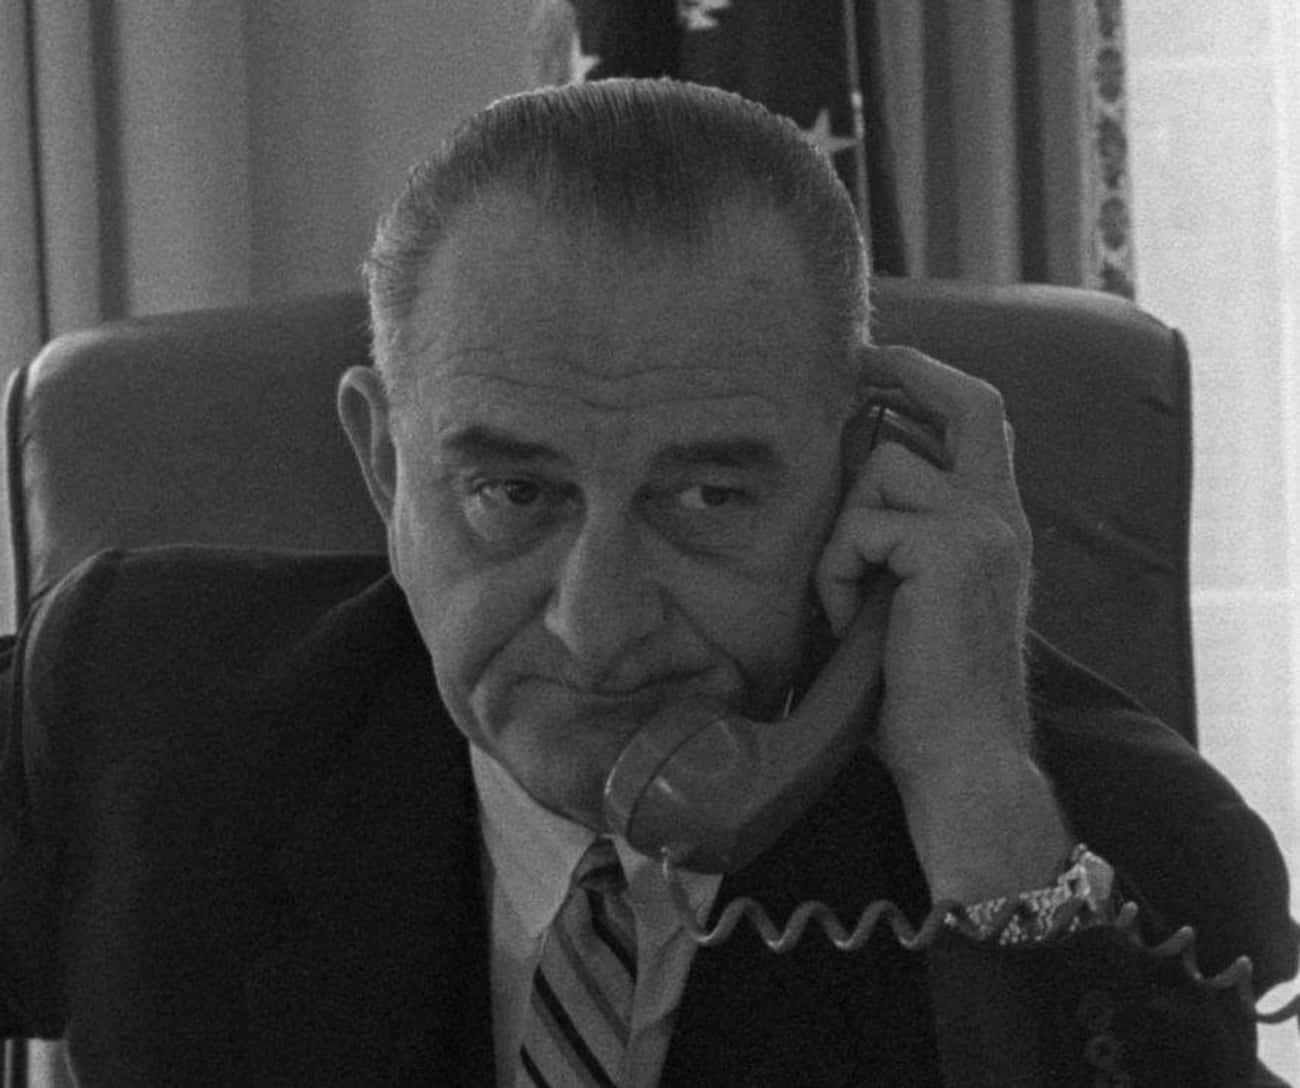 Lyndon Johnson Lied About Attacks To Justify Sending More US Troops To Vietnam